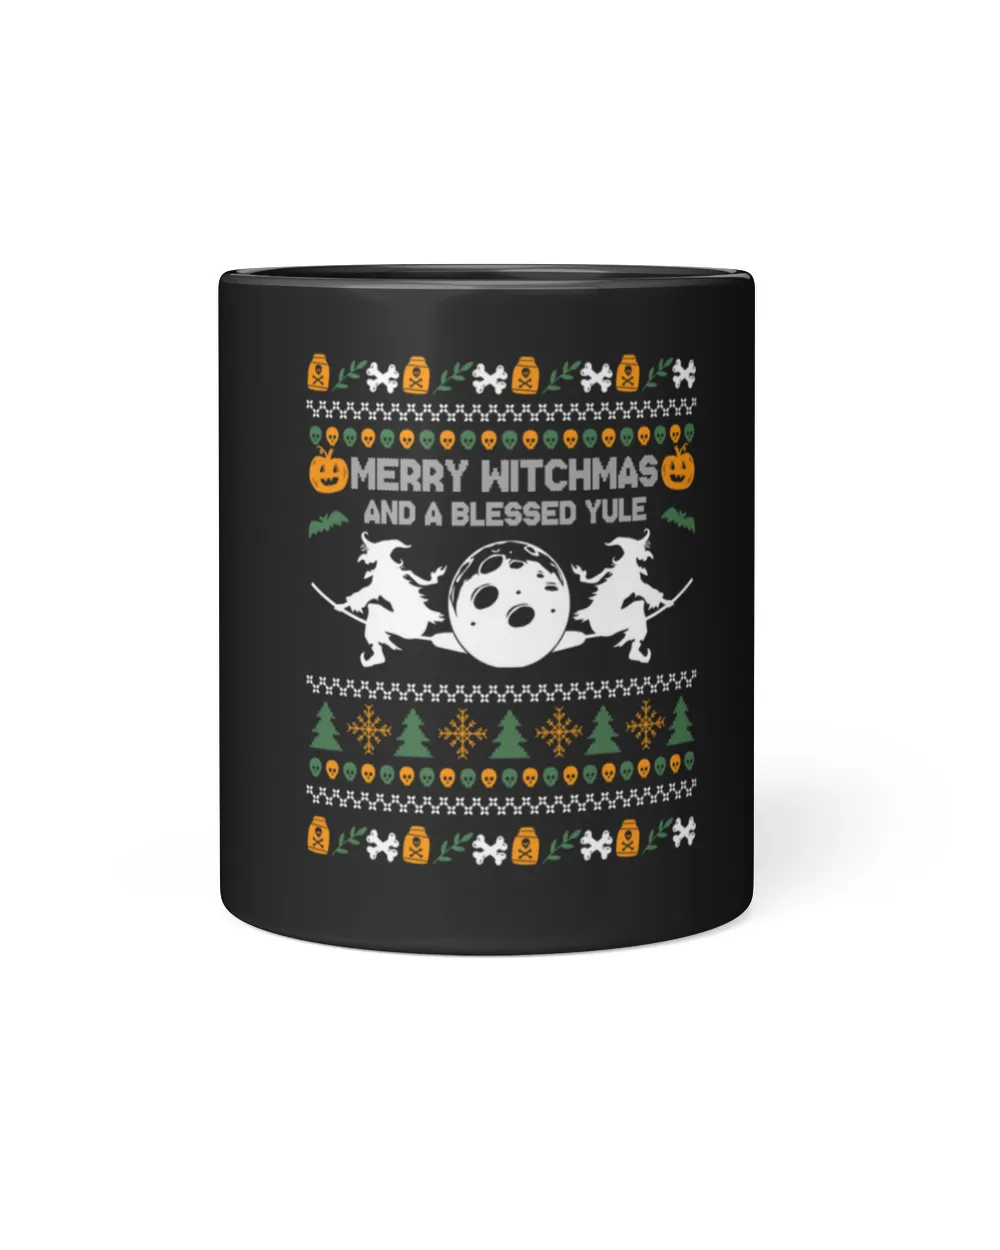 Merry Witchmas And A Blessed Yule Witch Christmas Sweater Gear Essential Mug